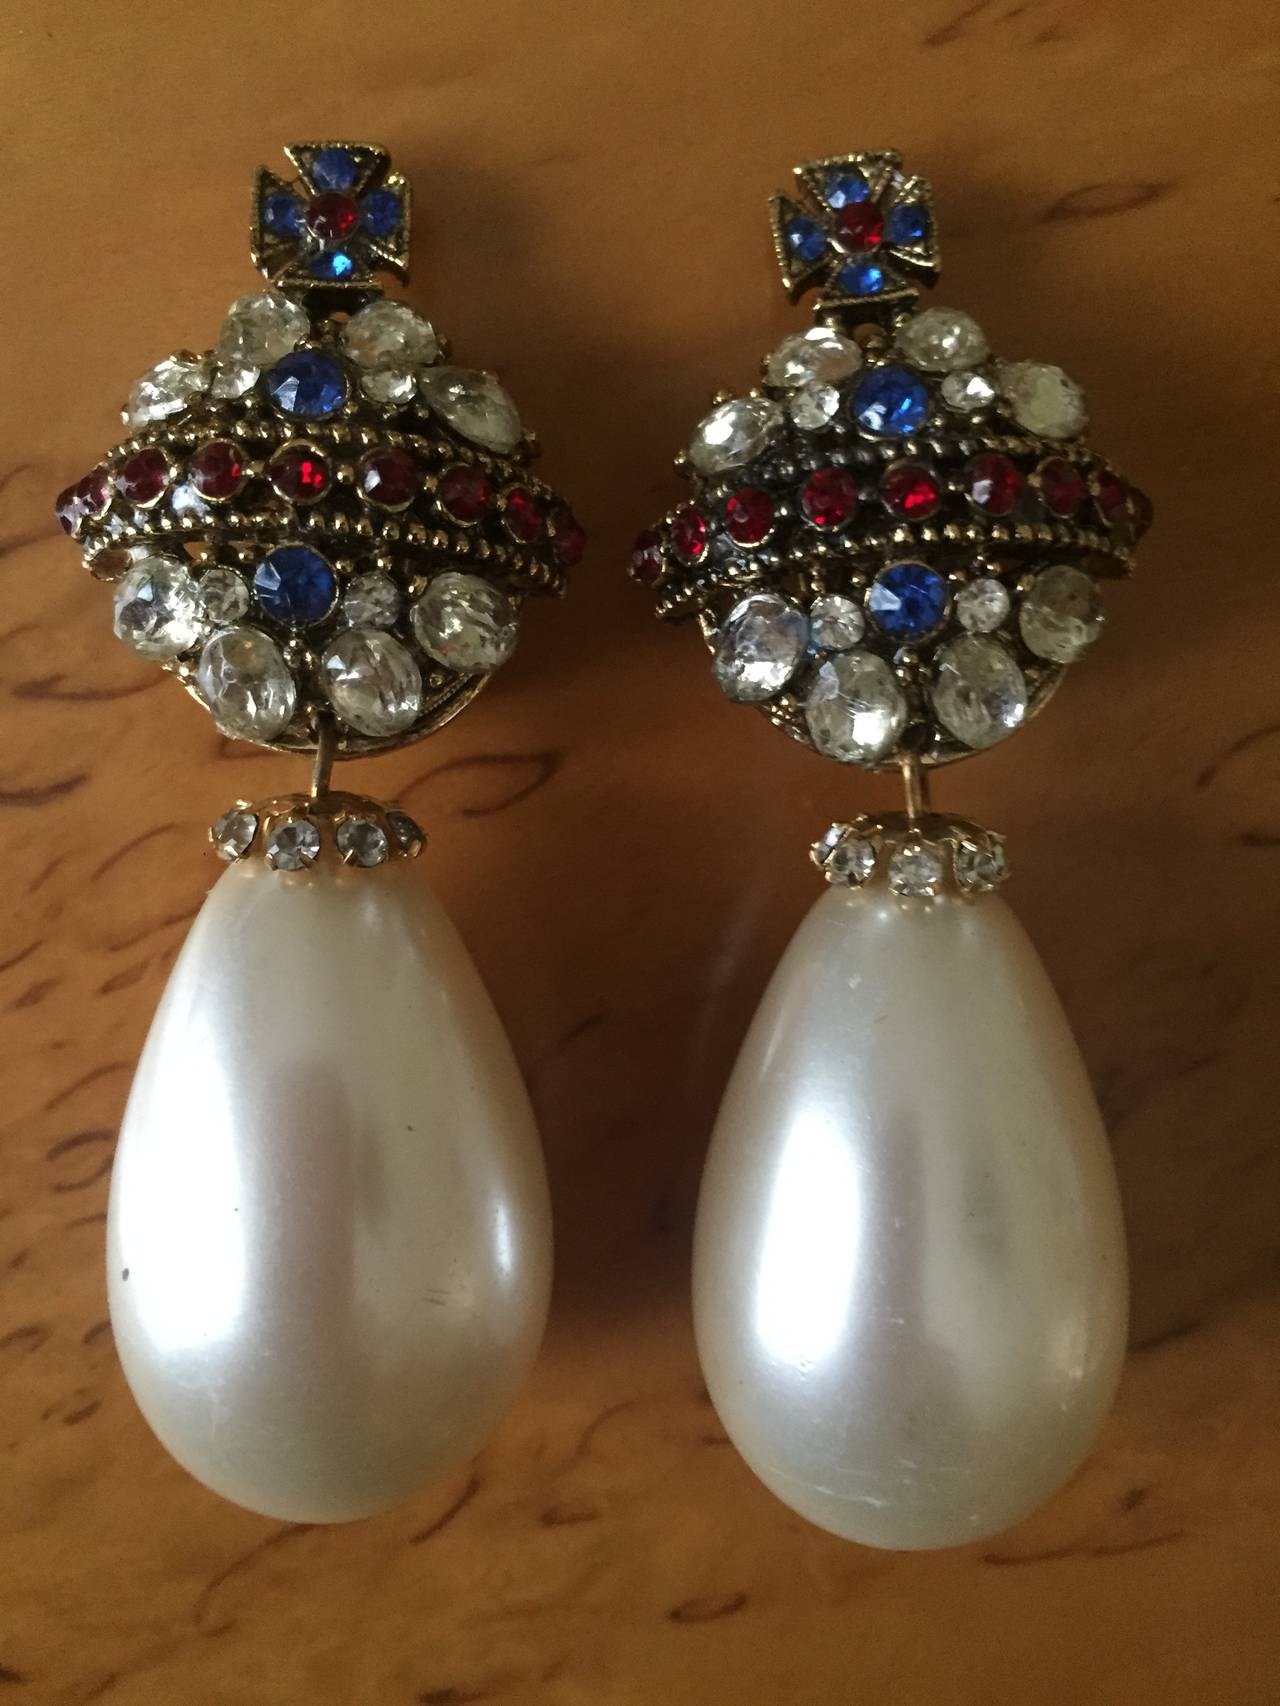 Wonderful royal orb earrings from my Royal Crest collection 1984
Faux ruby saphire and crystal
earring measures 1